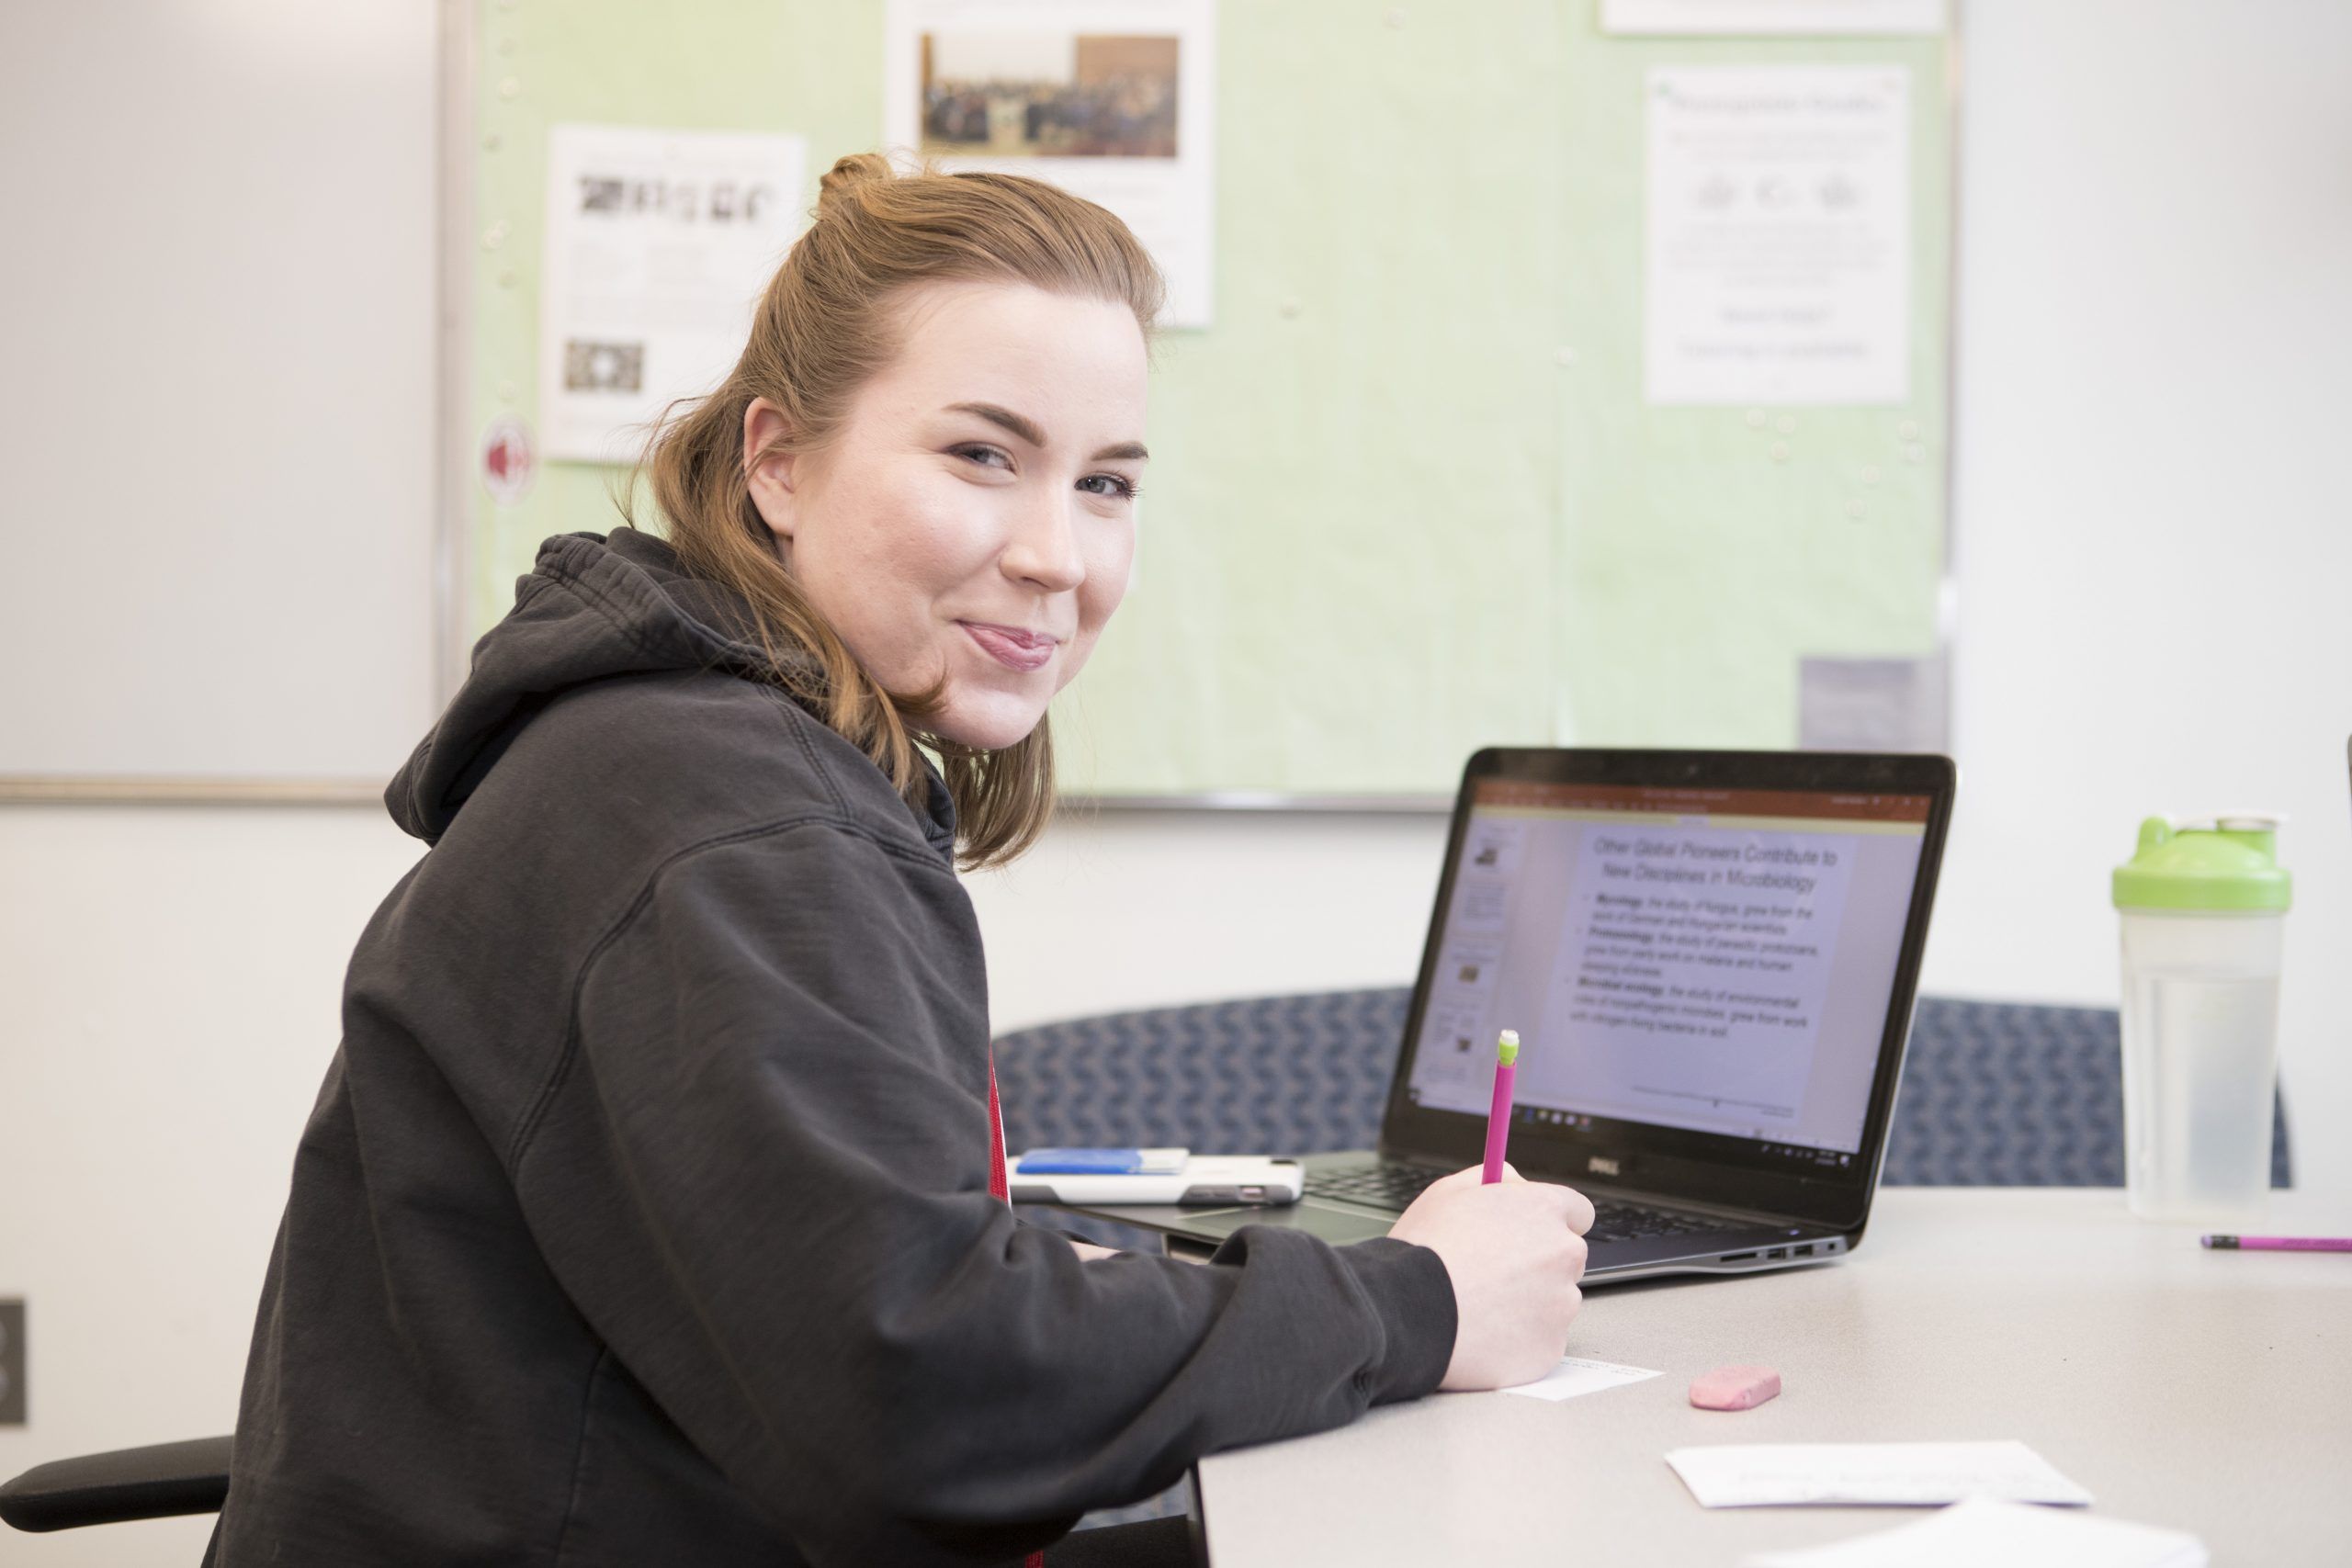 A Worcester state student working on homework on an open laptop, looking into the camera and smiling